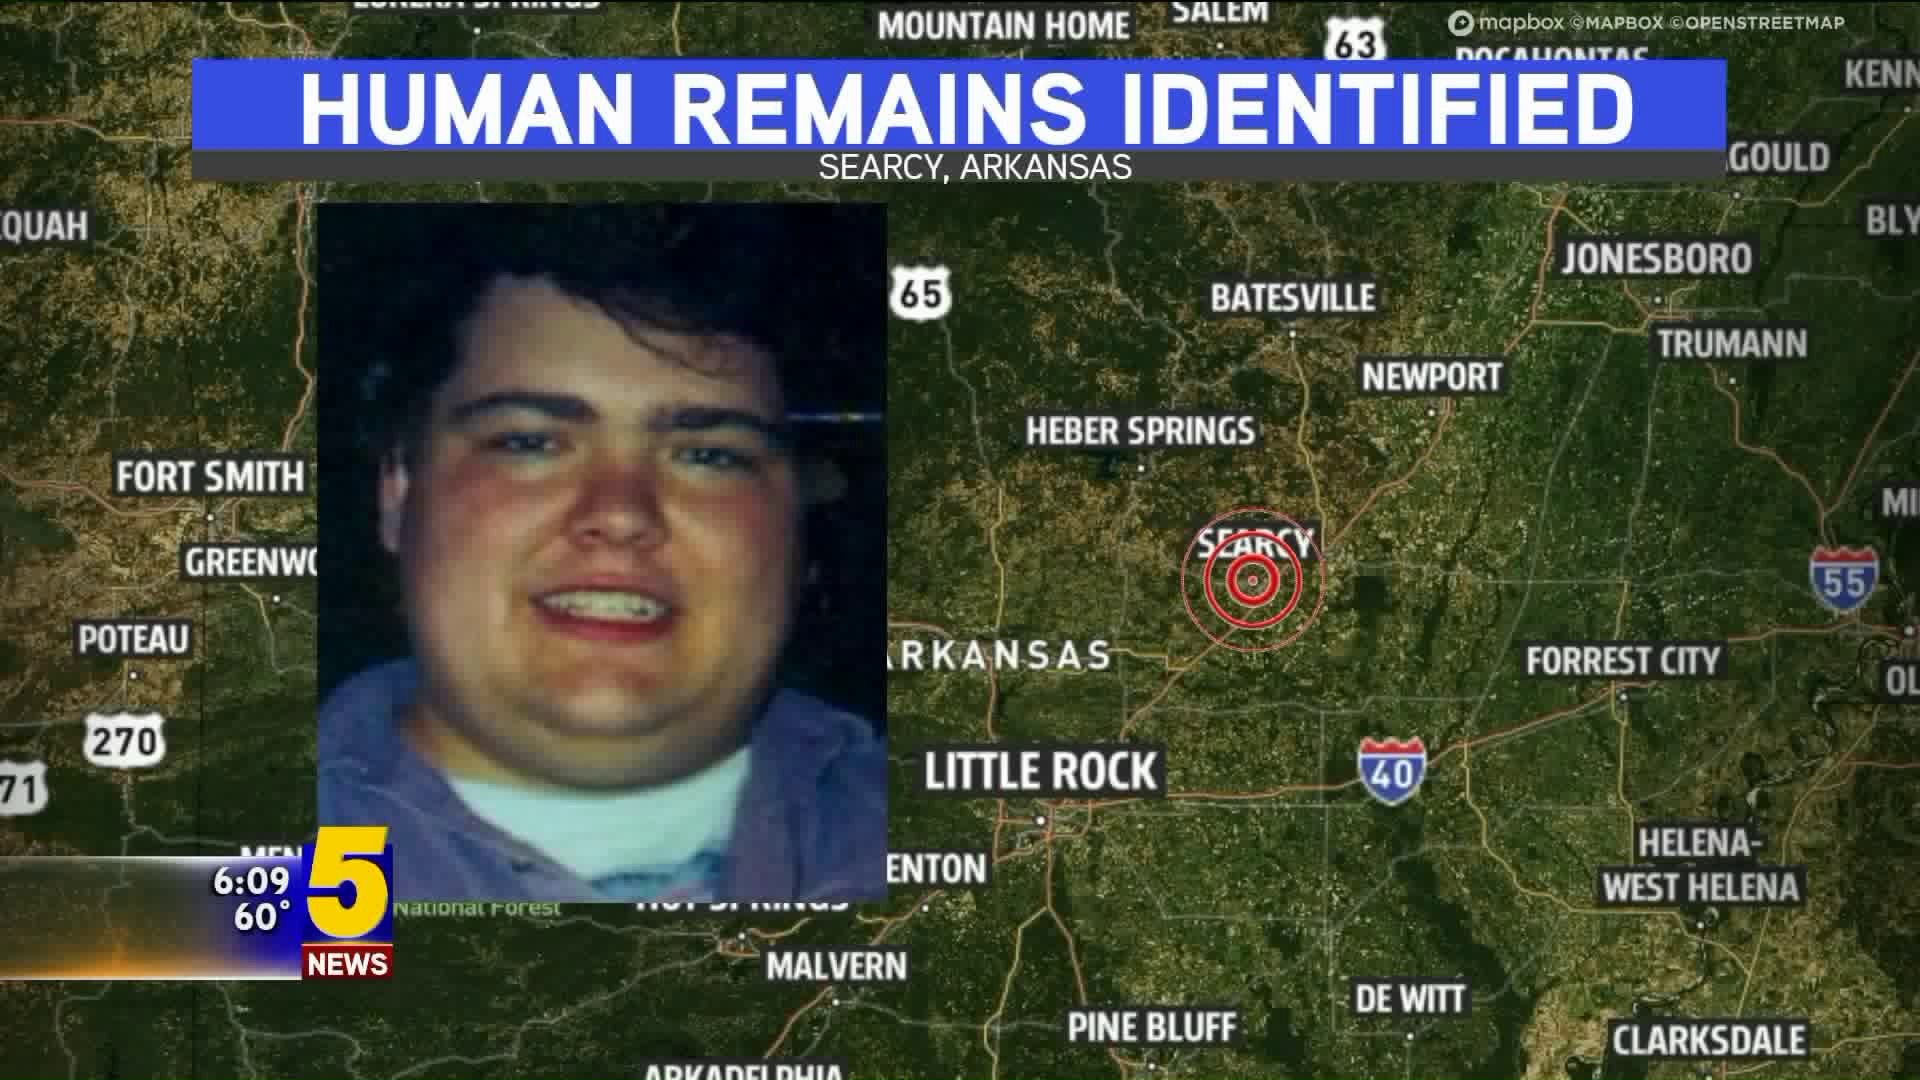 Human Remains Identified in Searcy